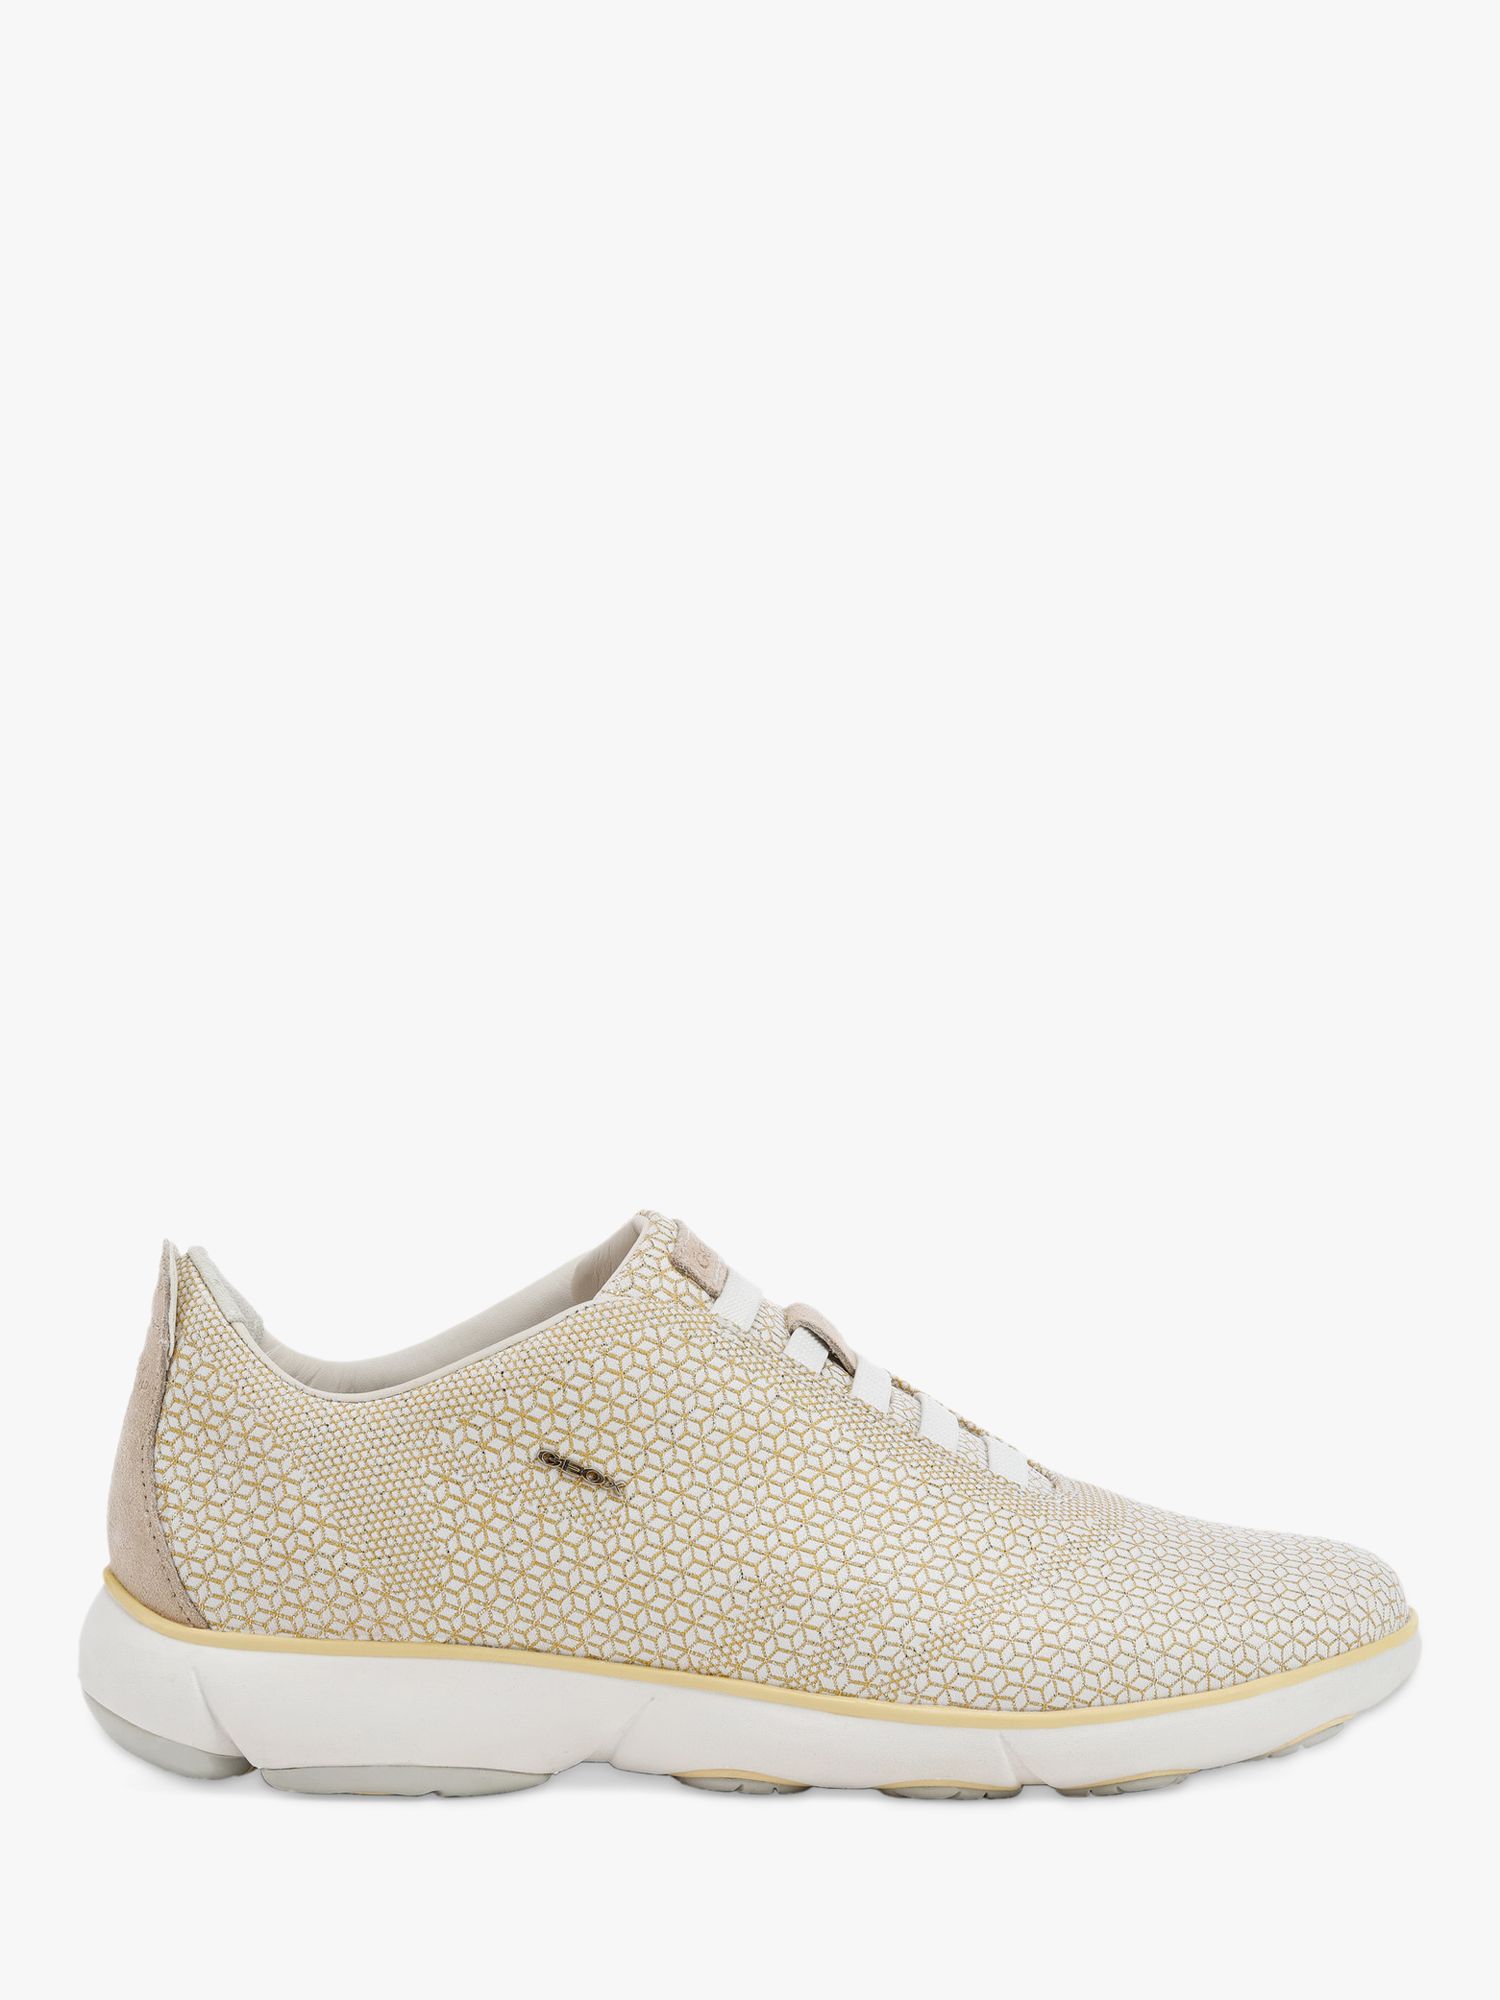 Geox Women's Nebula Breathable Trainers, Off White/Beige